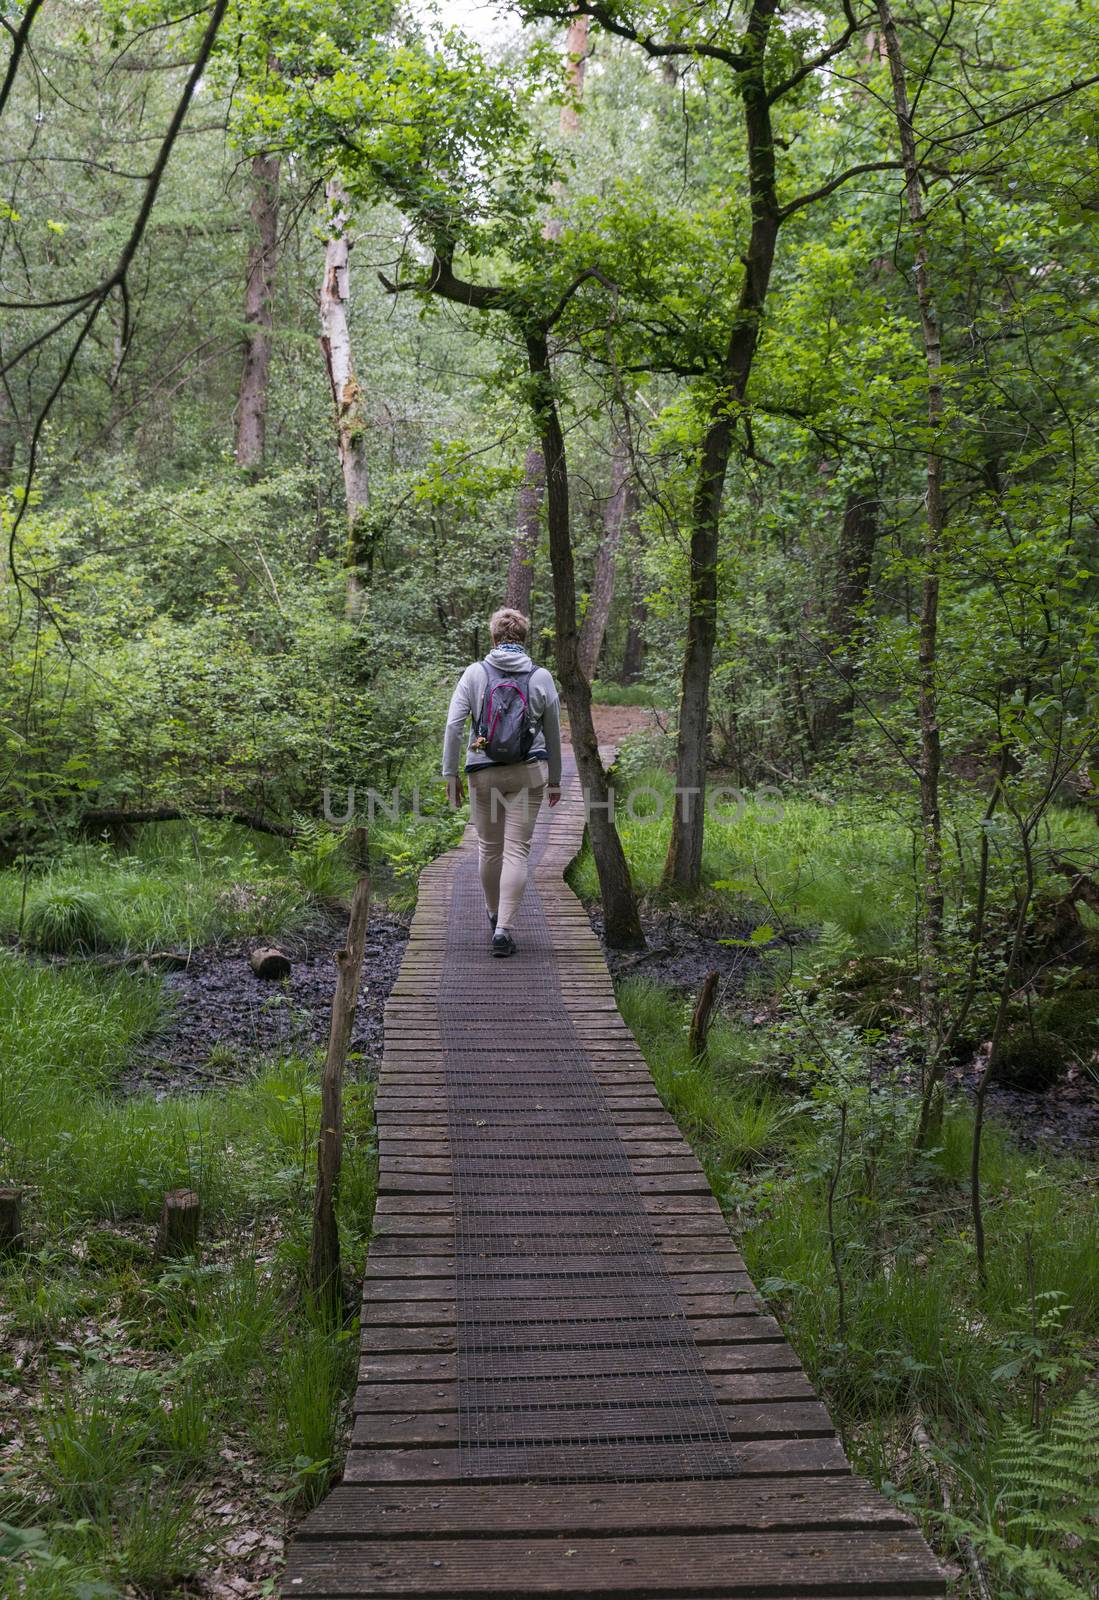 Alstatte,Germany,16-may-2018:Woman walking in the forest of alstatte, alstatte is a nature area on the border of holland and germany with a big forest and hiking tracks